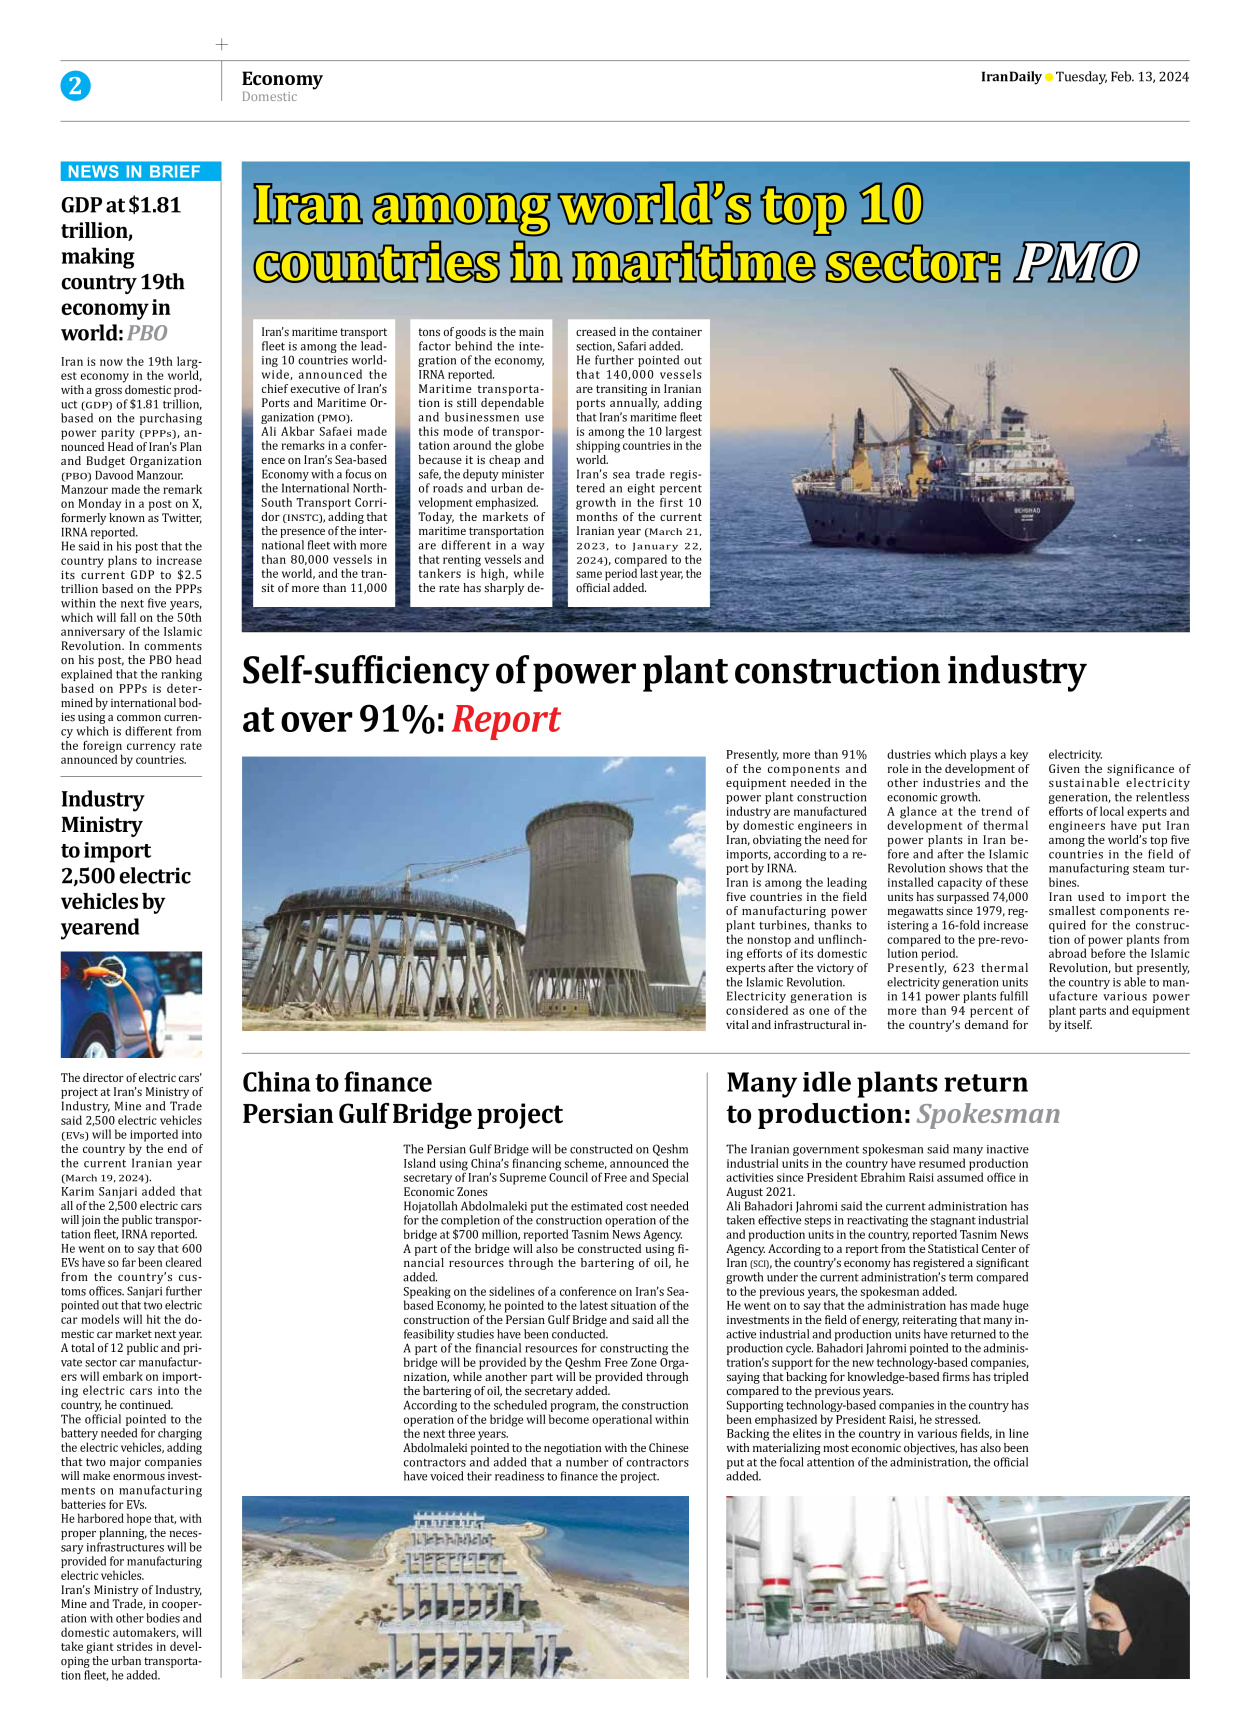 Iran Daily - Number Seven Thousand Five Hundred and Six - 13 February 2024 - Page 2